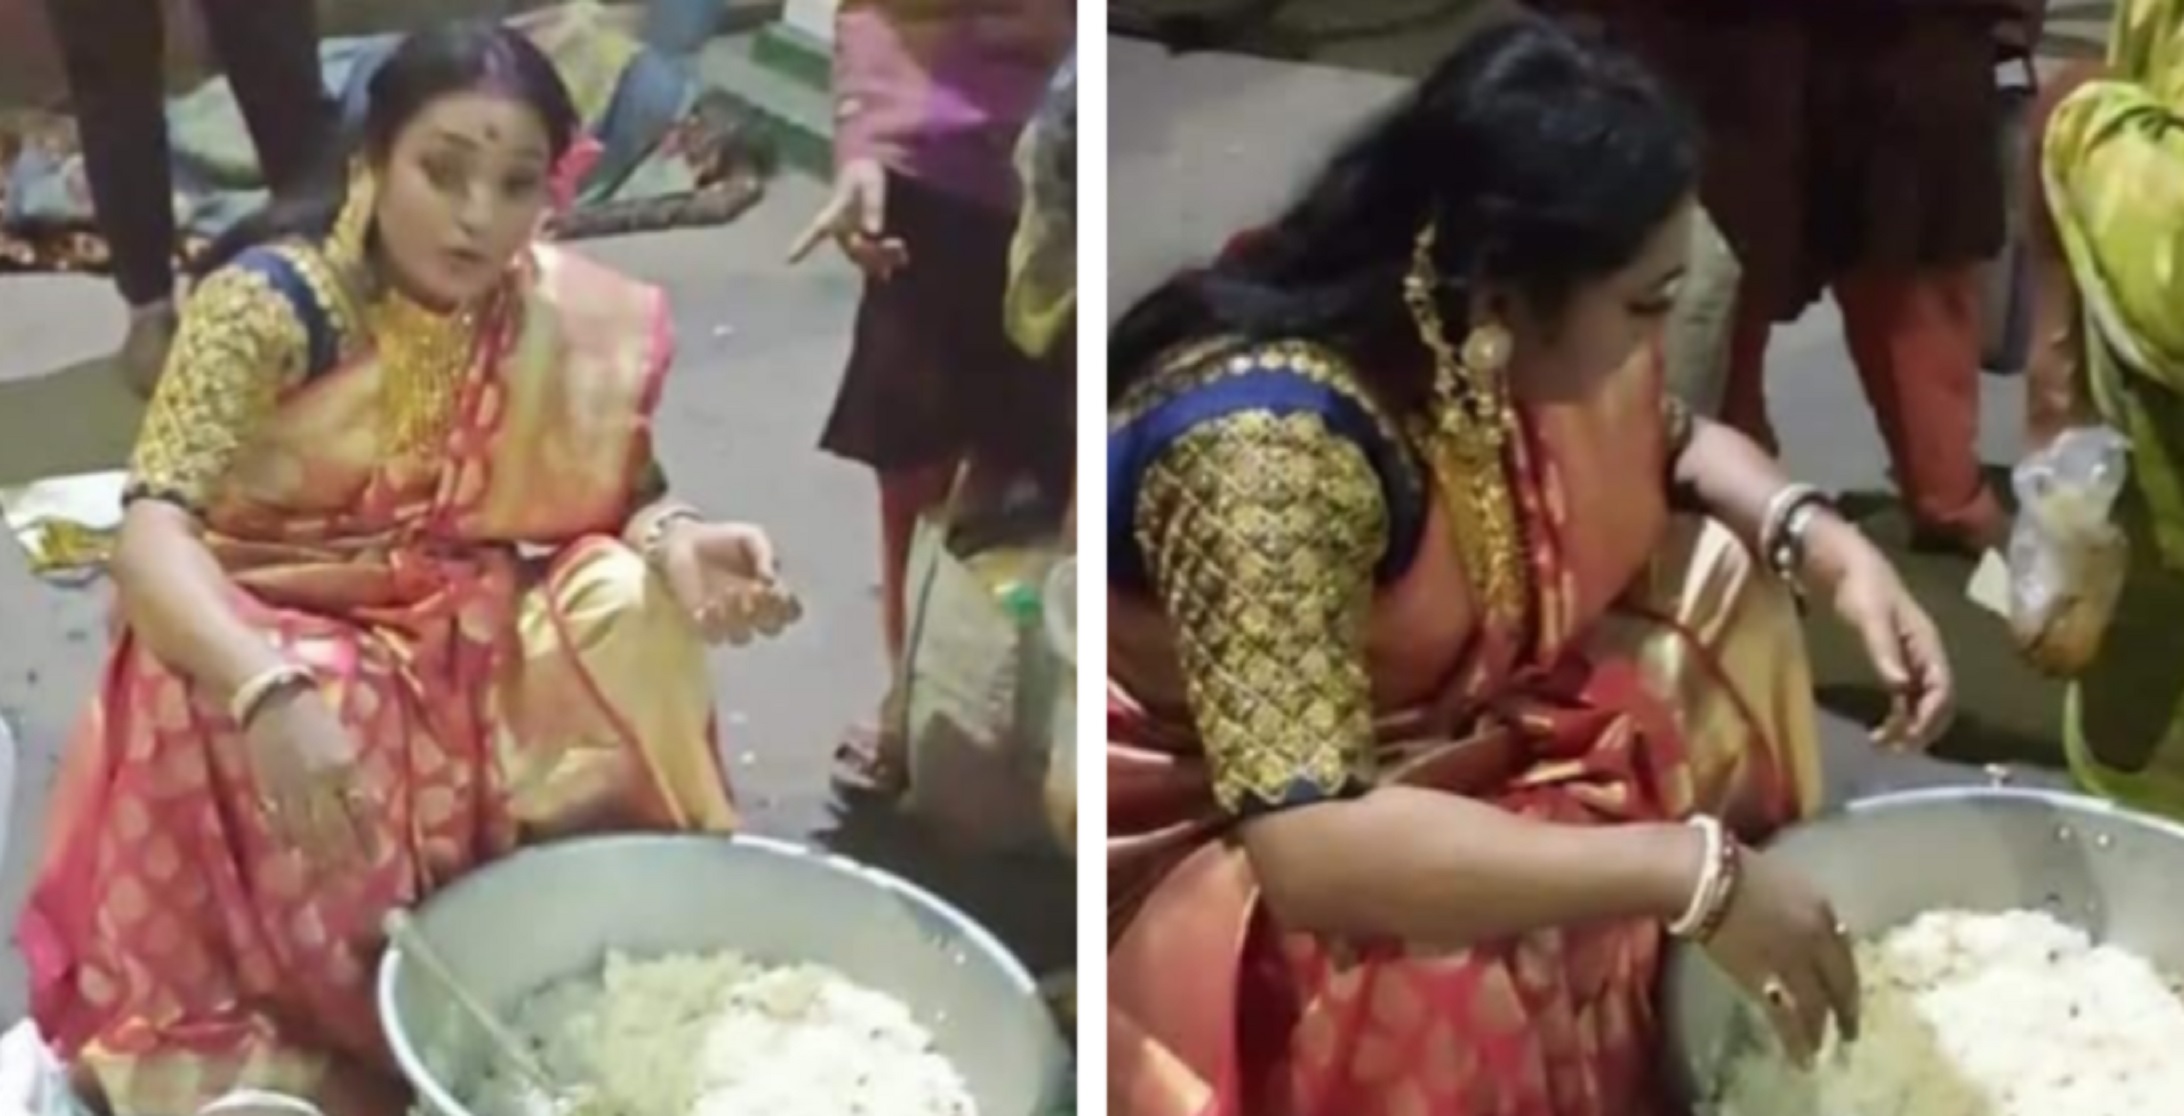 Woman Distributes Leftover Food From Brother’s Wedding To The Poor And Needy, Story Goes Viral